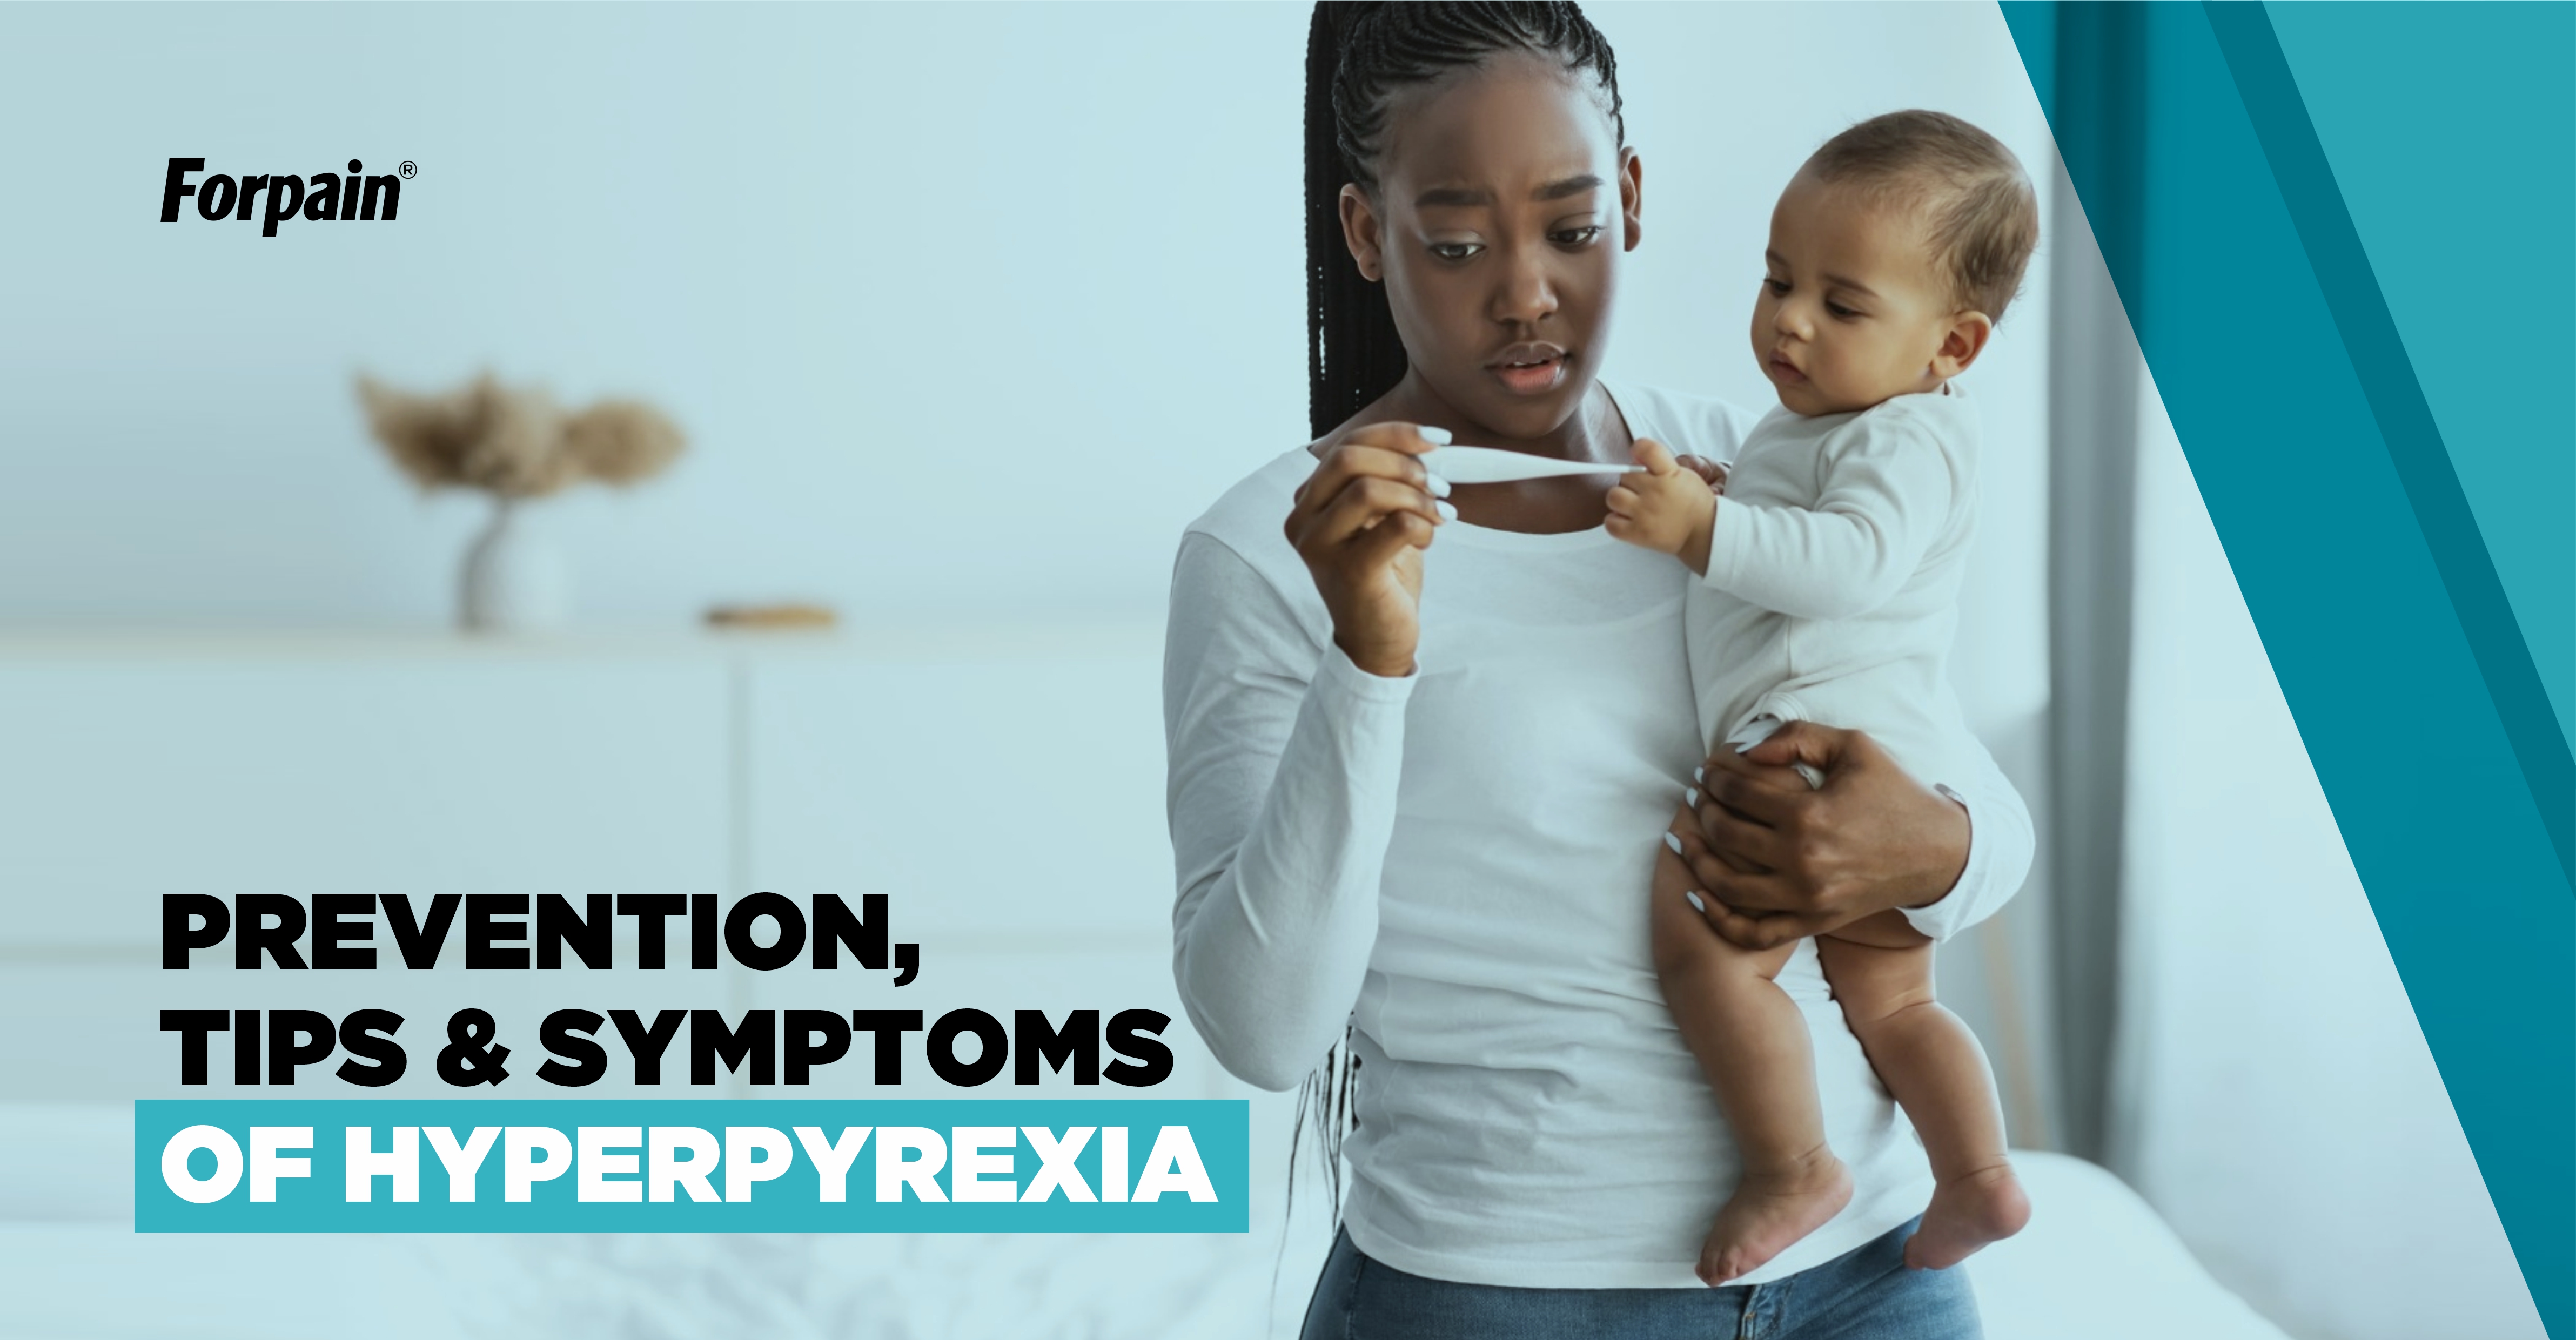 Prevention Tips & Symptoms of Hyperpyrexia